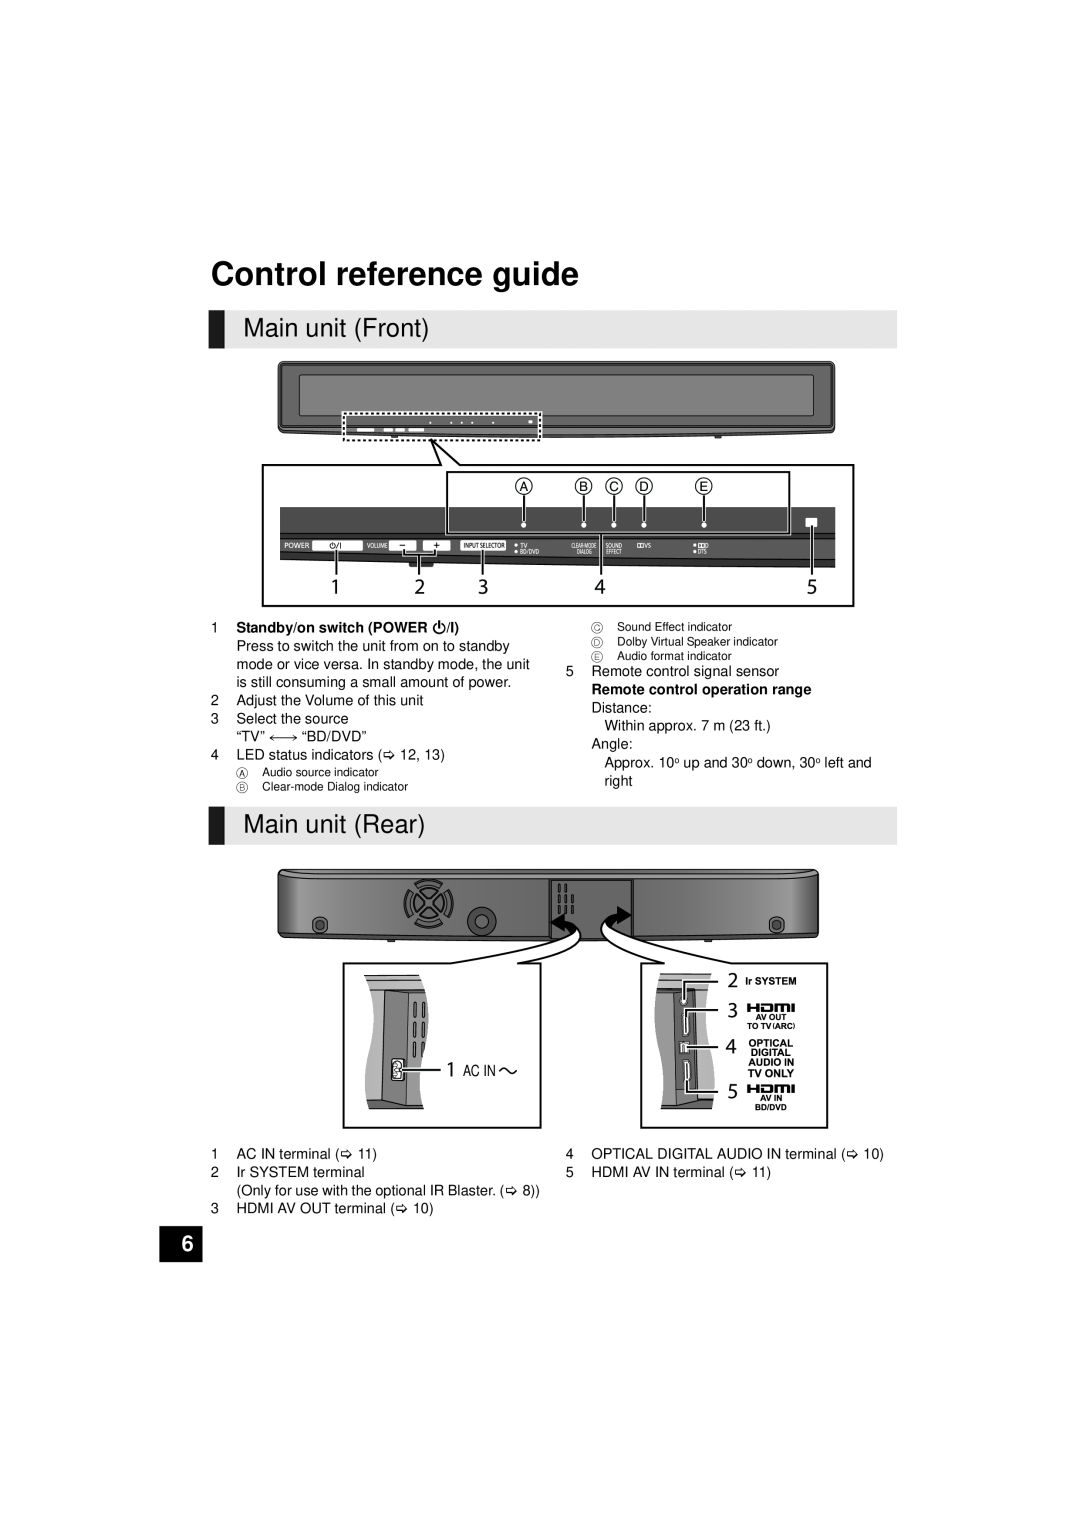 Panasonic SC-HTB10, RQTX1165-1P operating instructions Control reference guide, Main unit Front, Main unit Rear,      